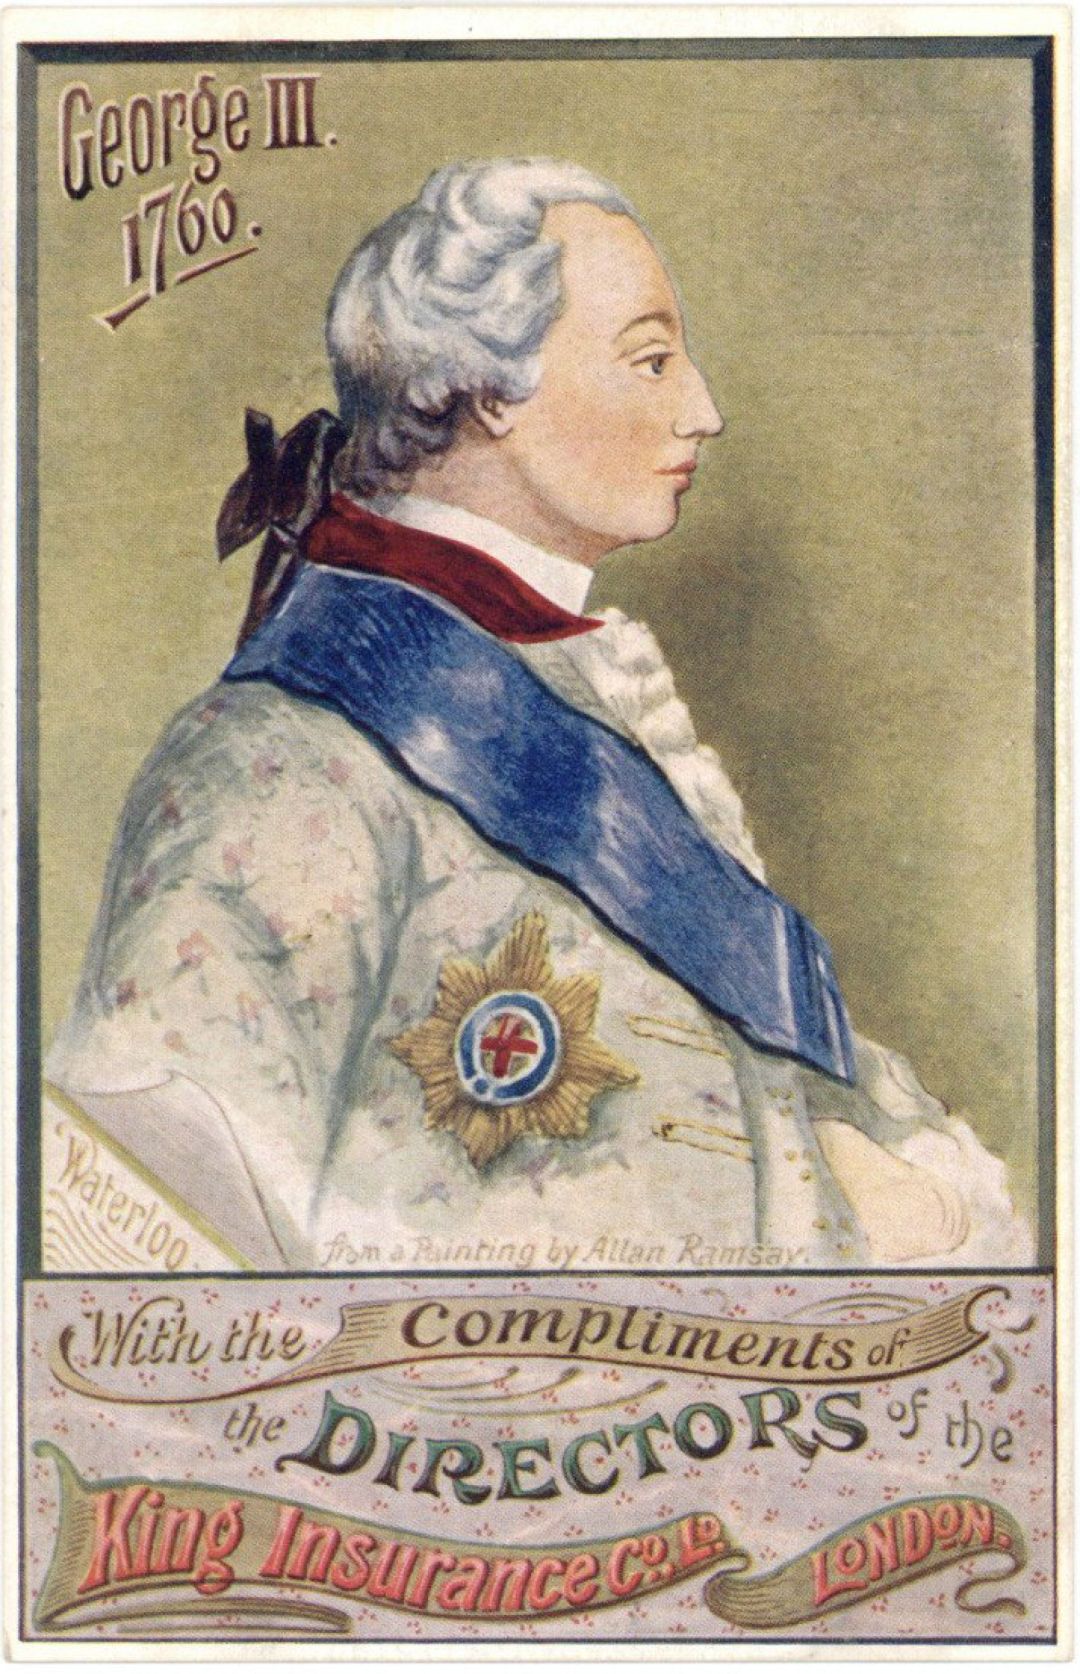 Post Card Ad for King Insurance Co. Ltd. dated 1760 -  Insurance